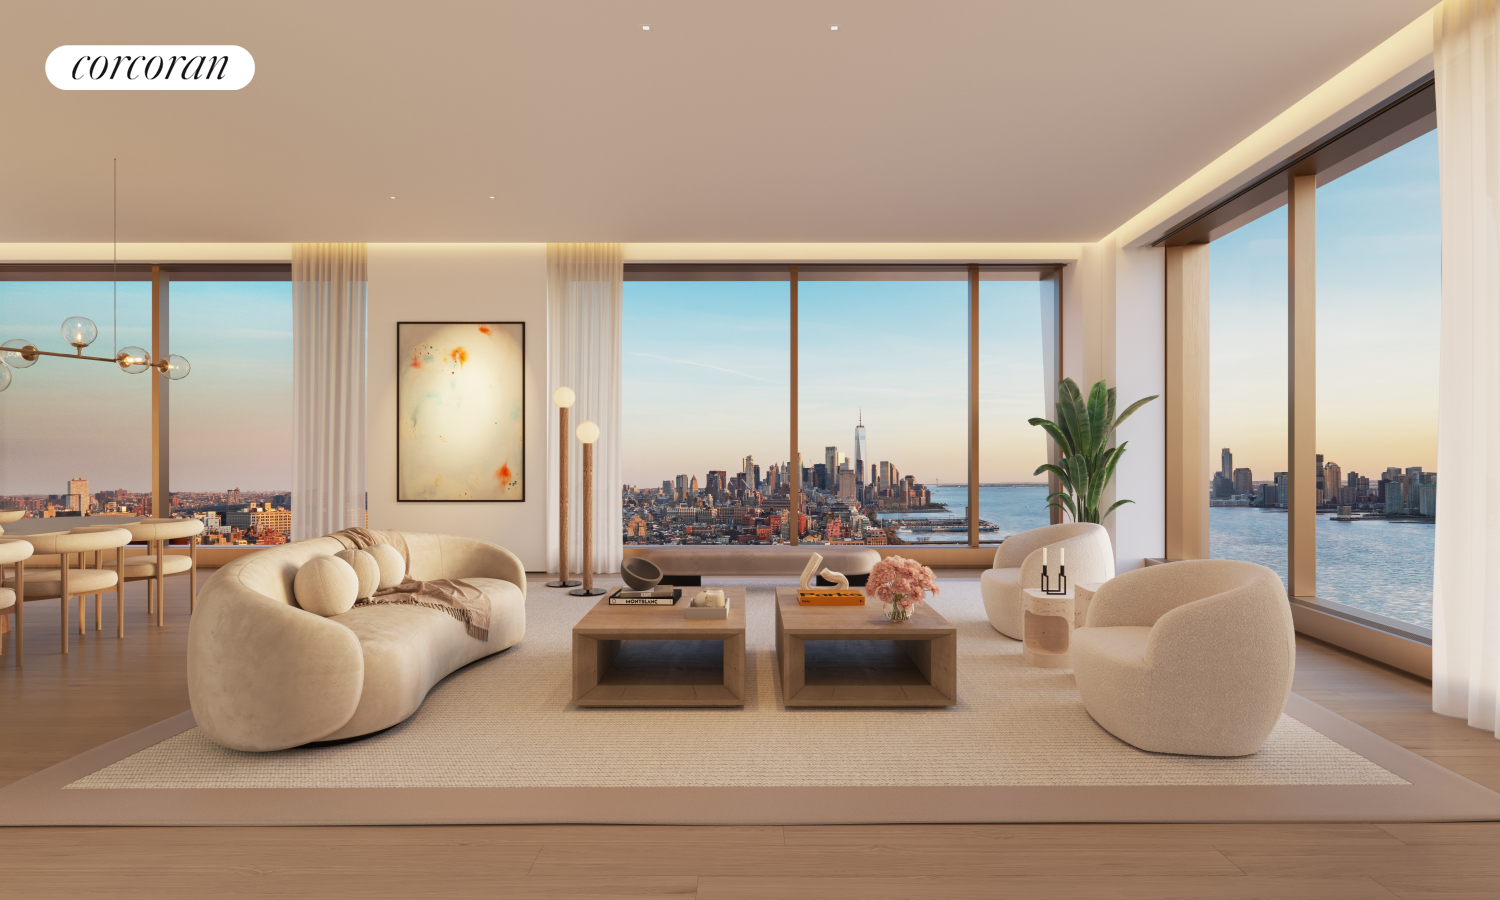 500 West 18th Street West Ph35b, Chelsea, Downtown, NYC - 4 Bedrooms  4.5 Bathrooms  6 Rooms - 